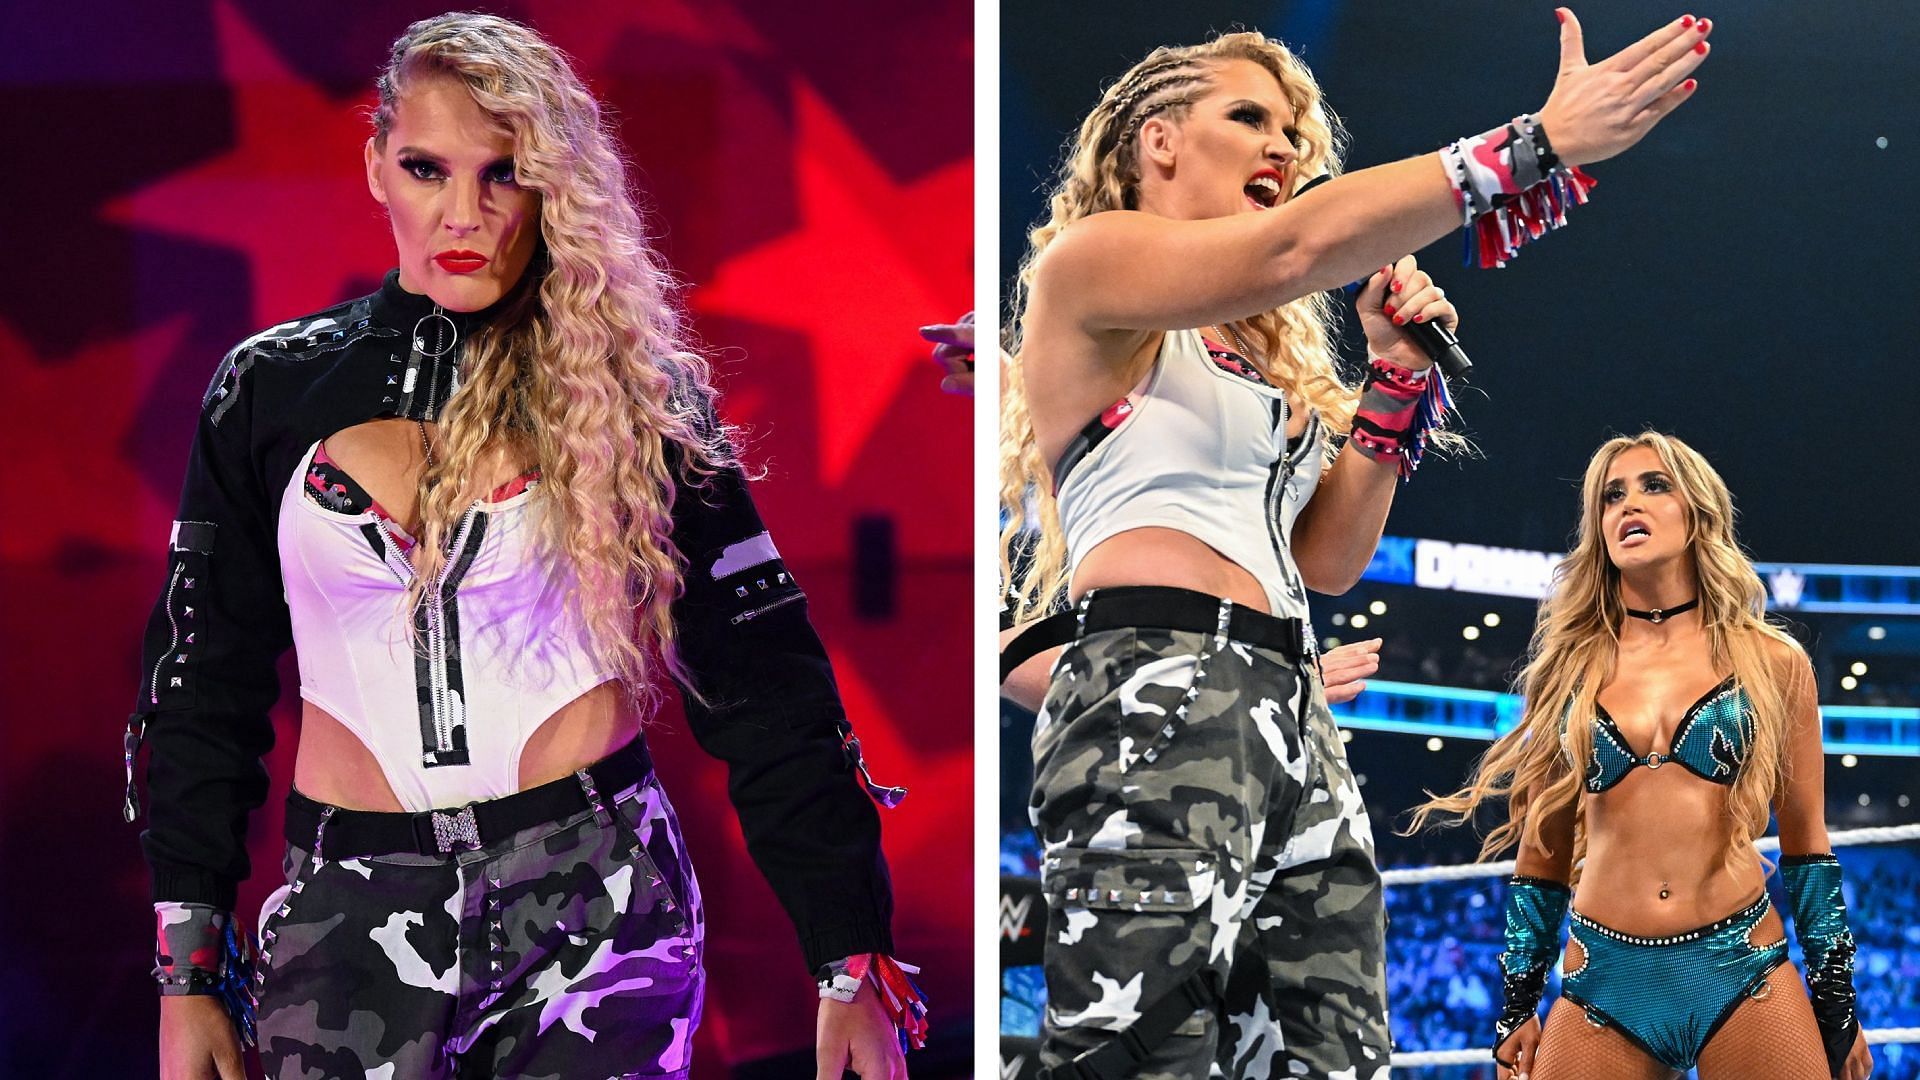 Lacey Evans and Aliyah are scheduled to compete on WWE SmackDown